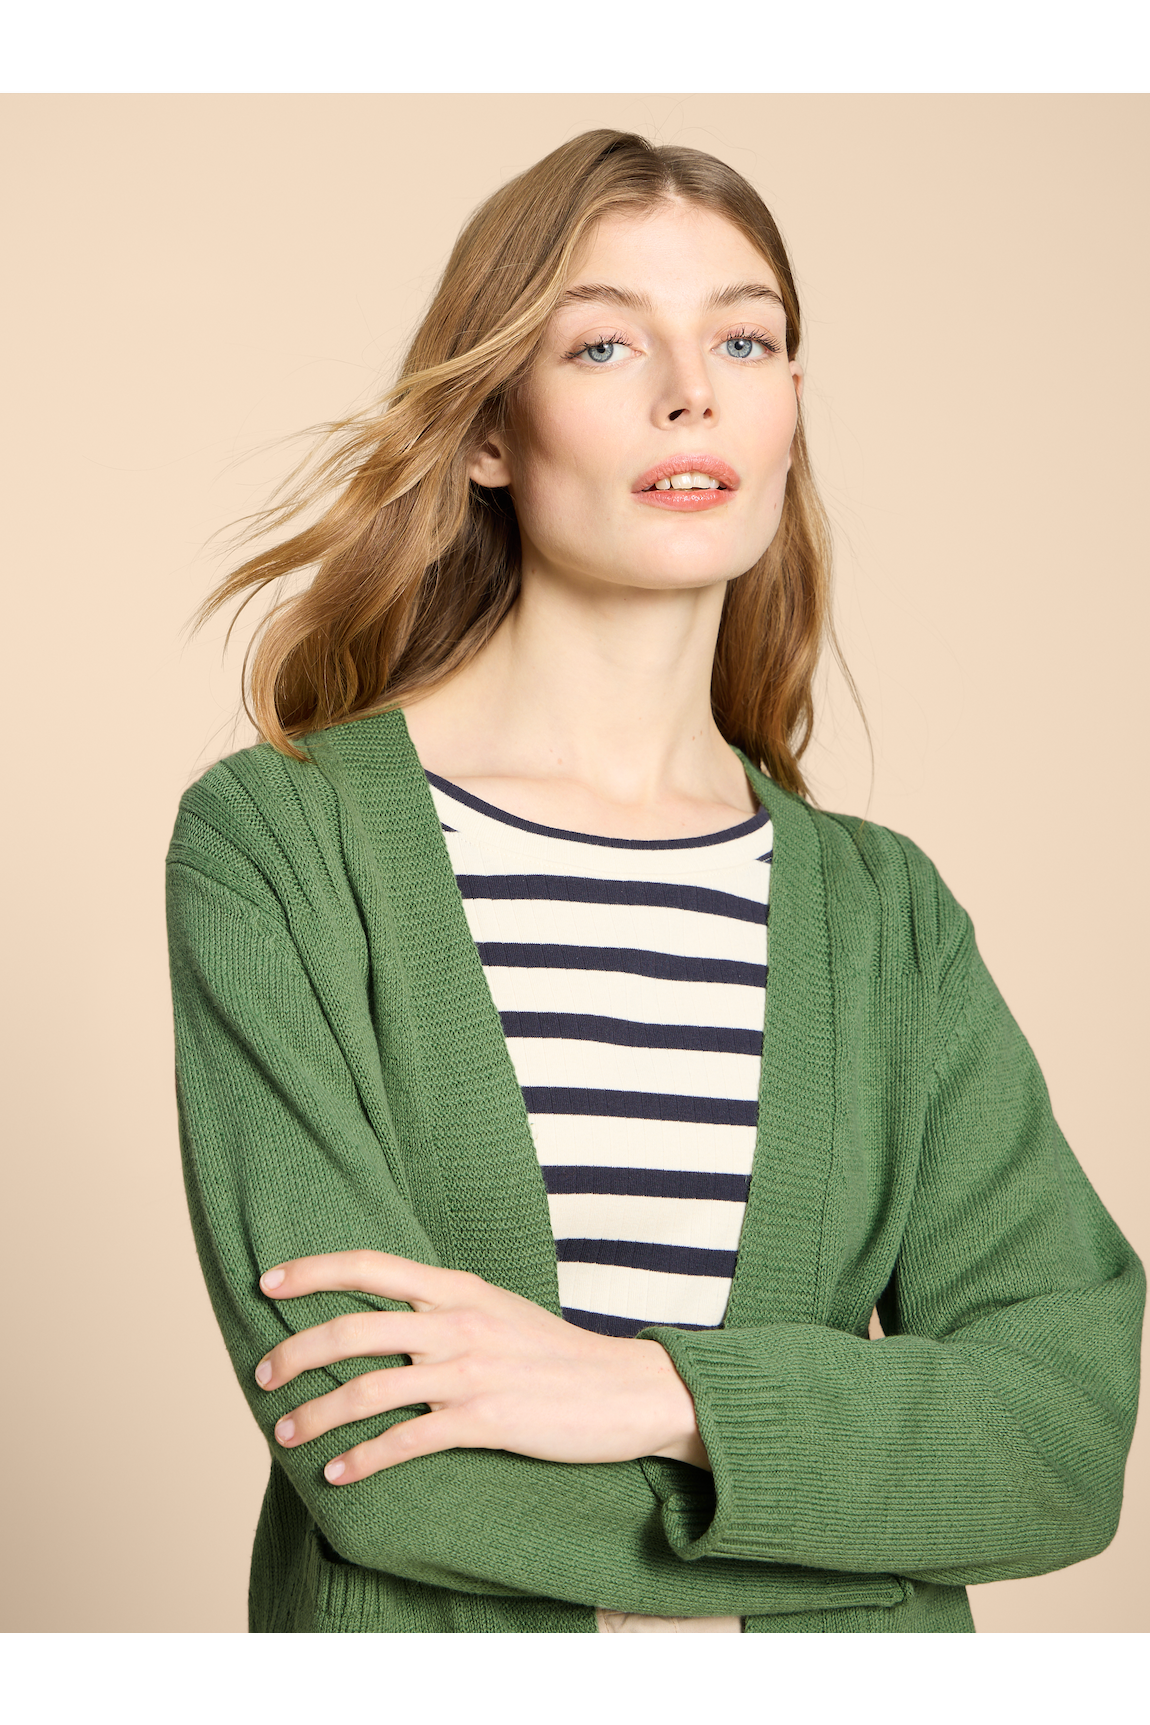 White Stuff Tula Cardi in Mid Green-Womens-Ohh! By Gum - Shop Sustainable